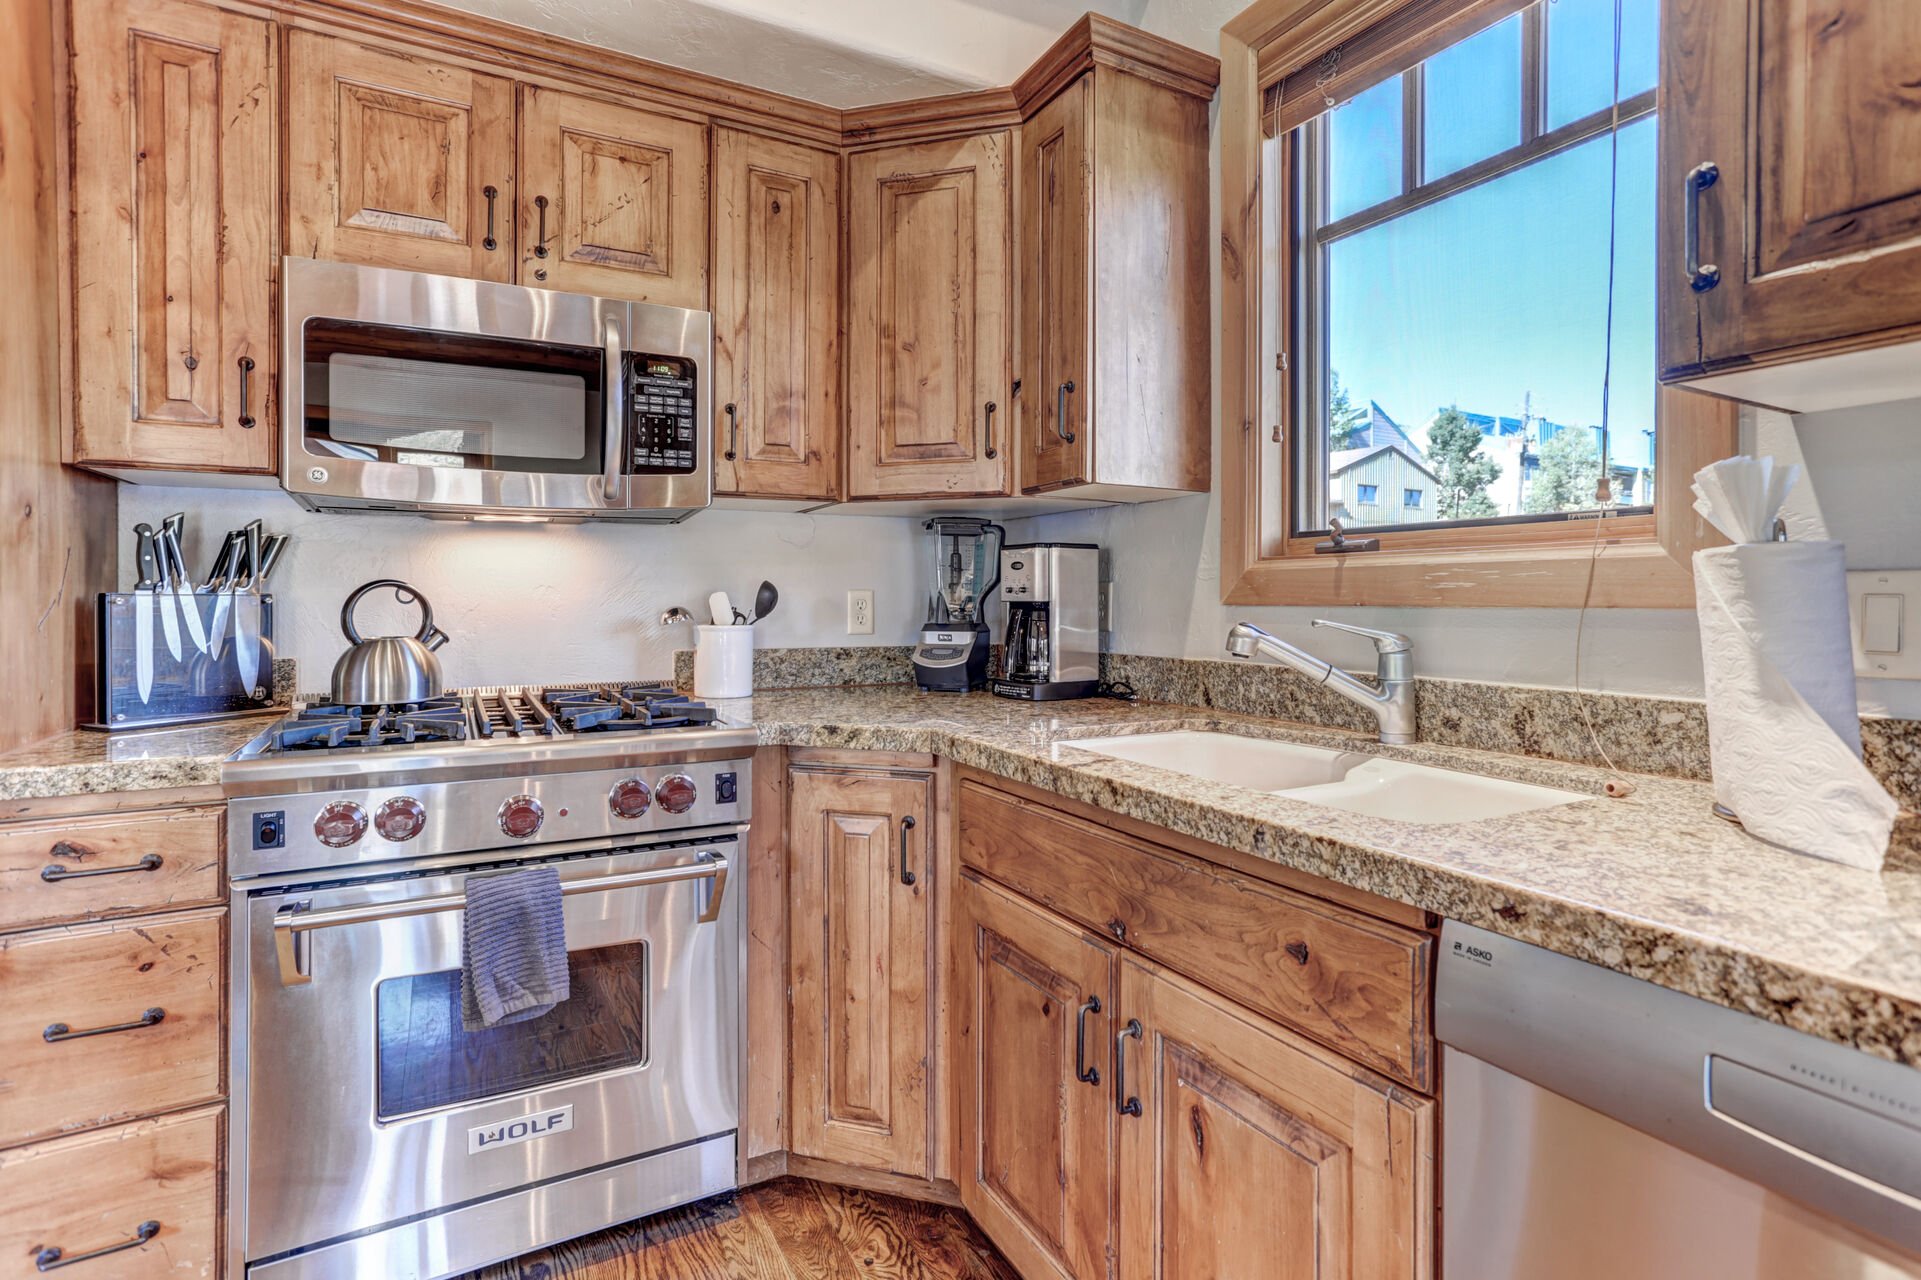 Gourmet display kitchen with Viking refrigerator, 5-burner gas stove, granite counters, and island with 4-bar seats